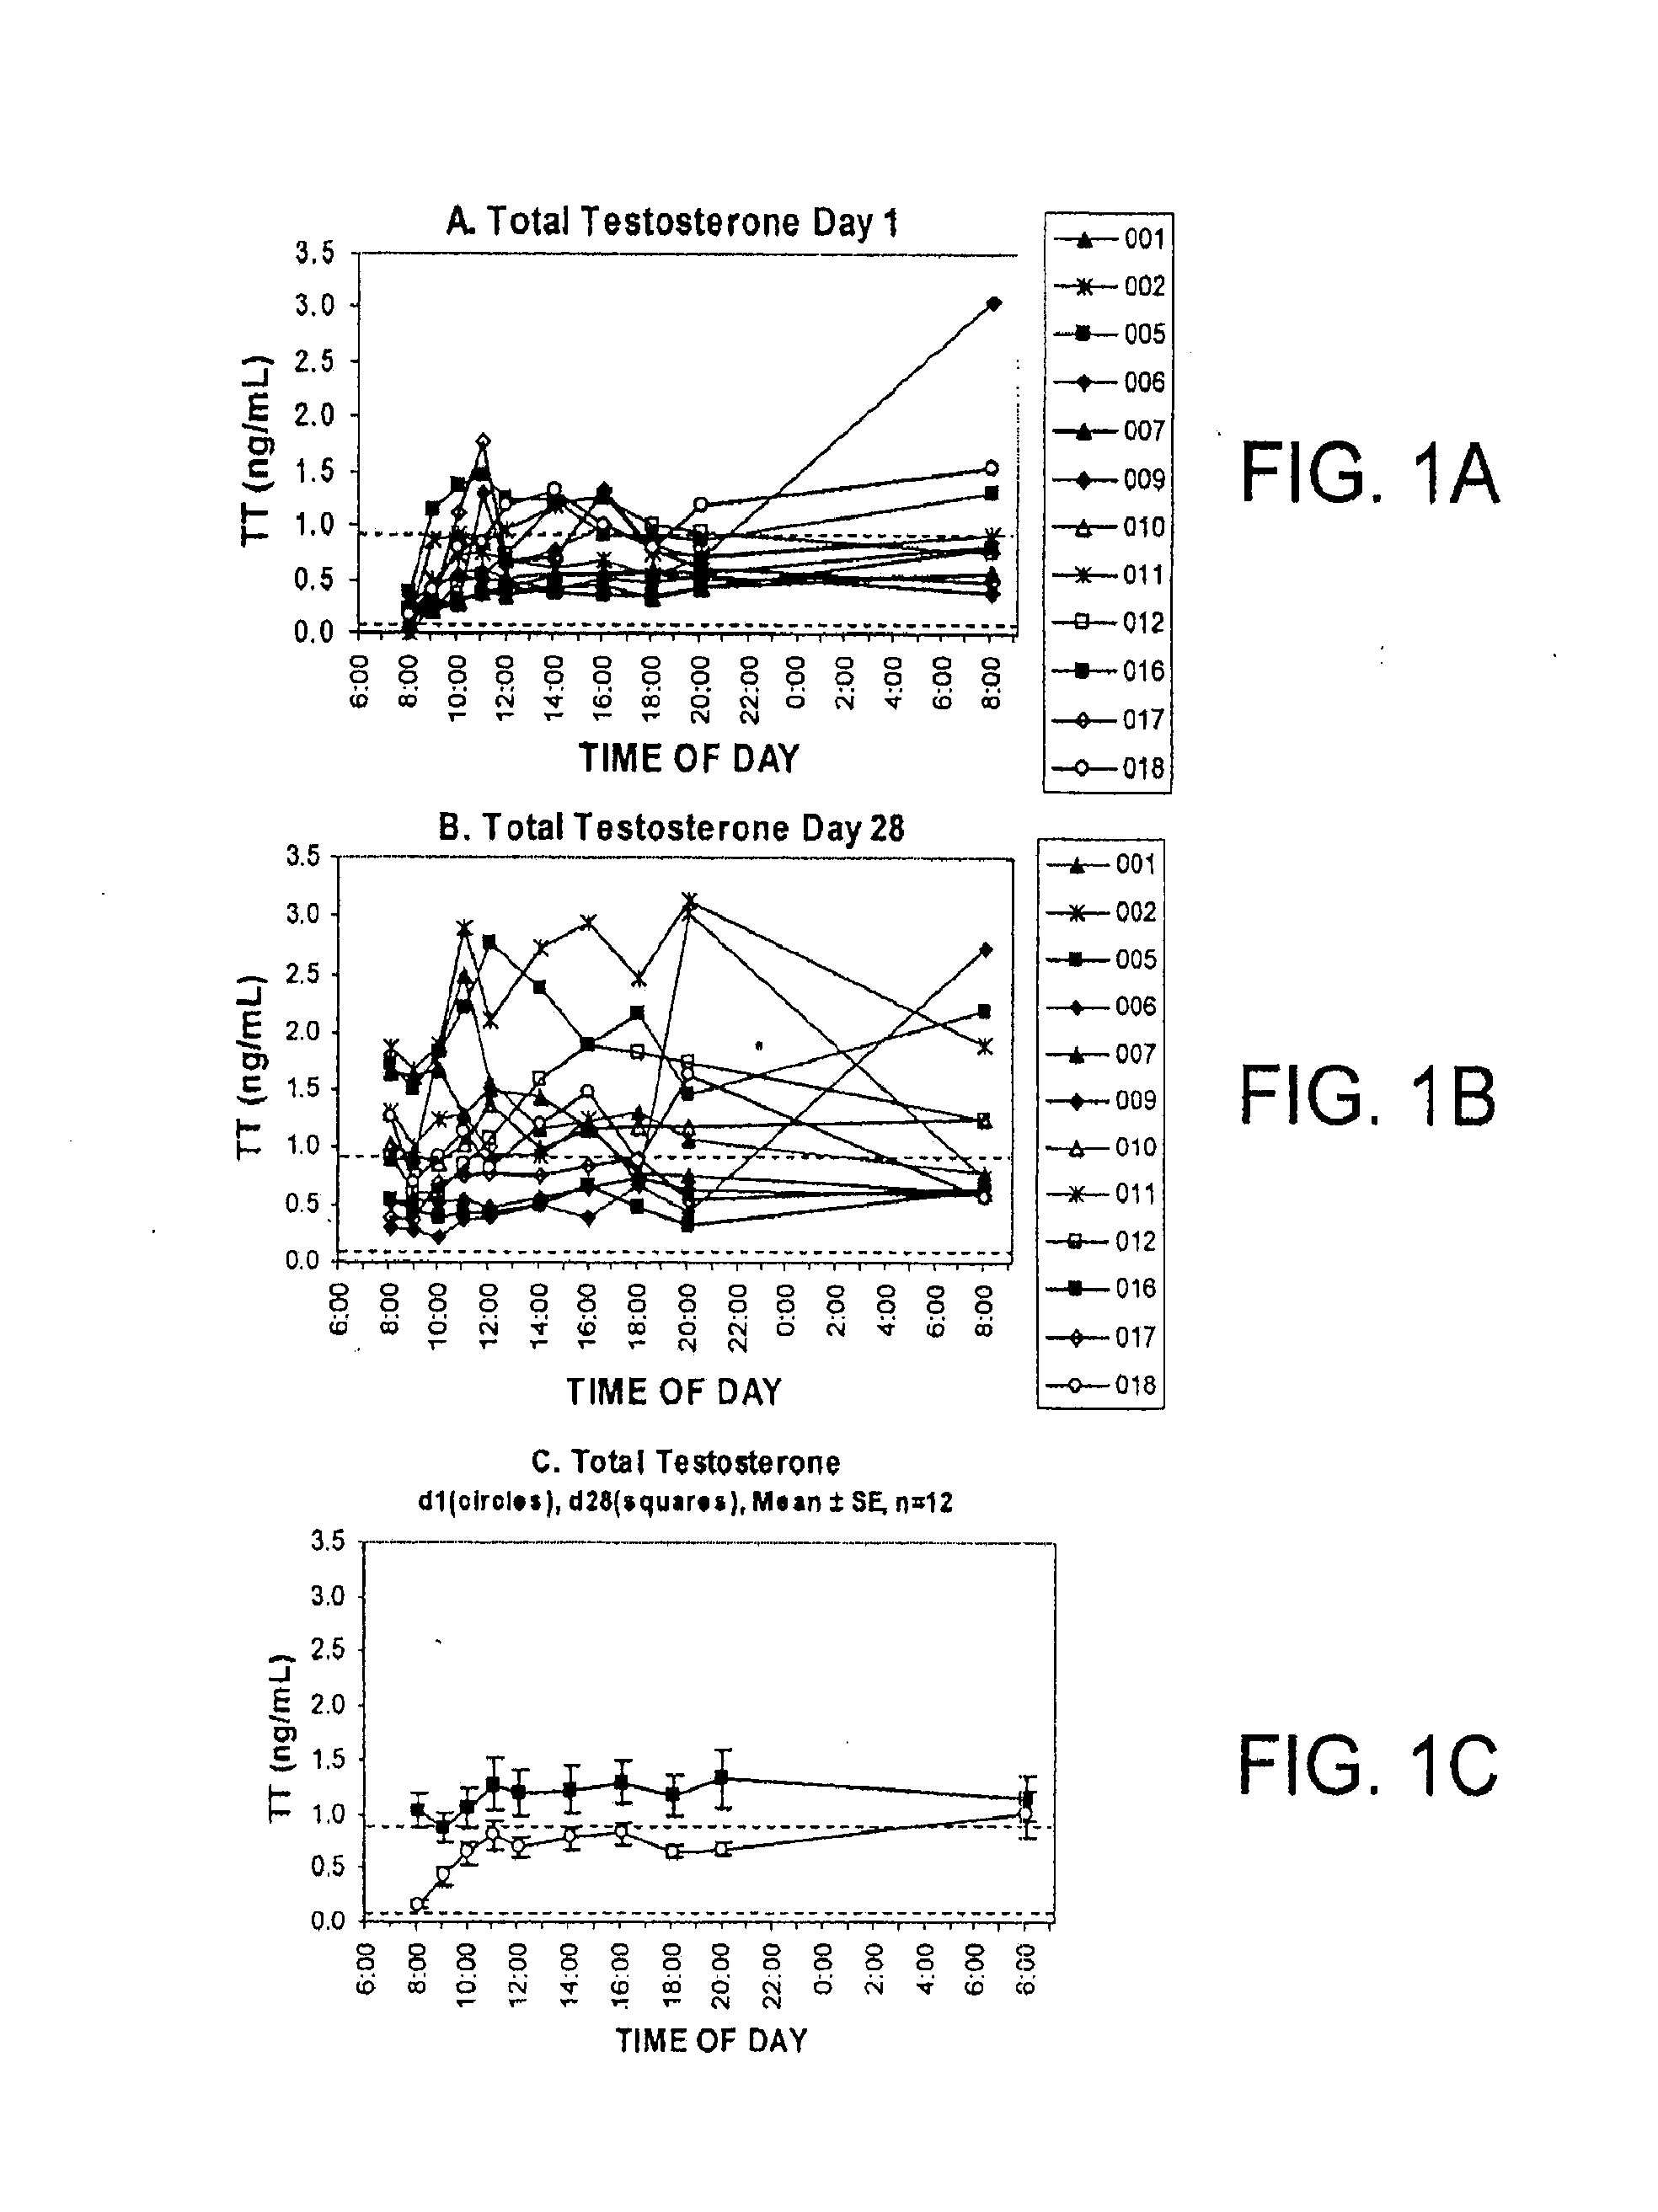 Methods for treating chronic or unresolvable pain and/or increasing the pain threshold in a subject and pharmaceutical compositions for use therein